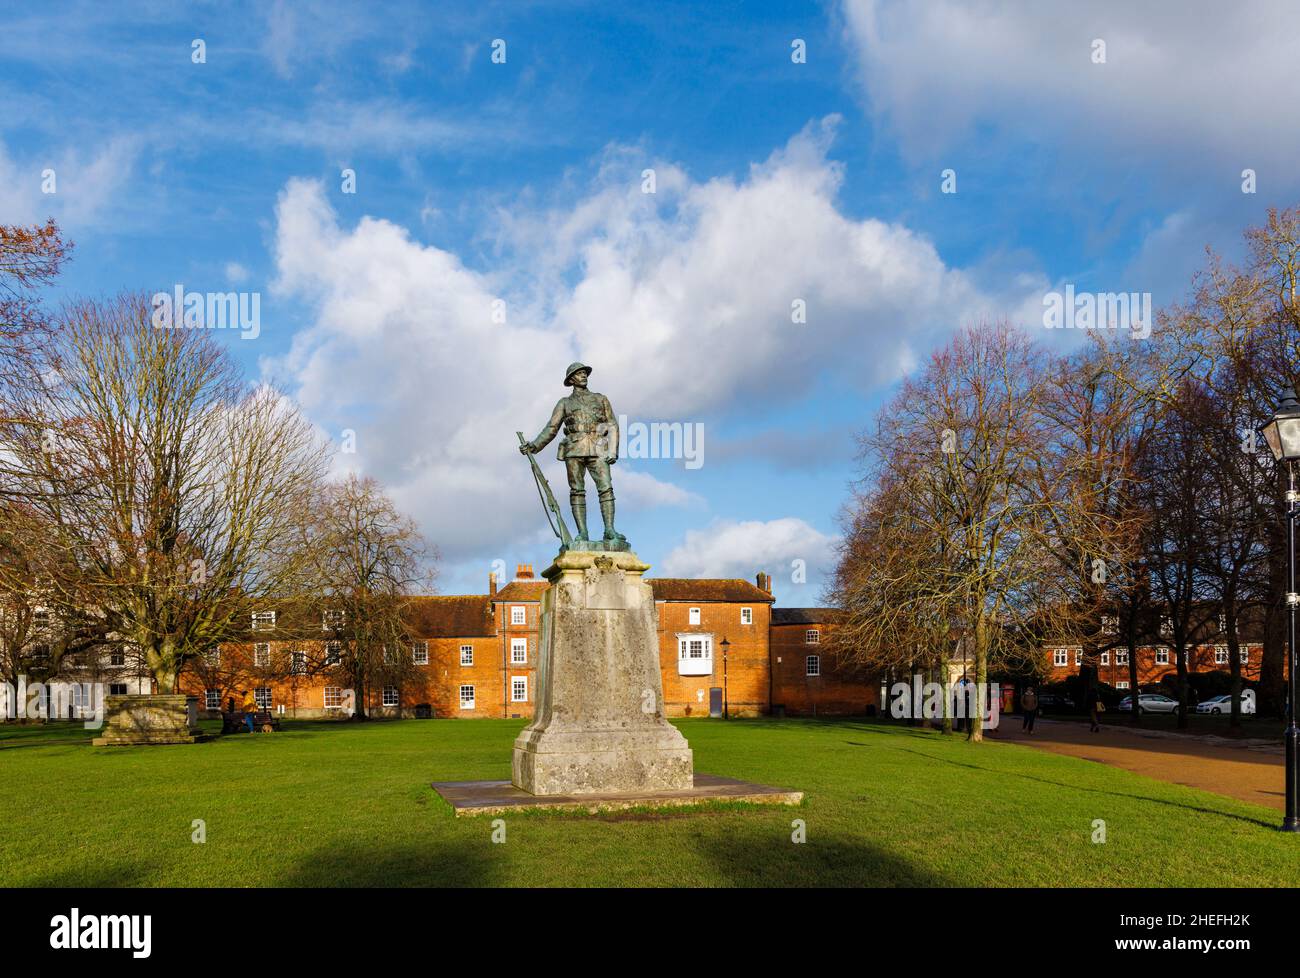 Commemorative memorial bronze statue of a rifleman of The King's Royal Rifle Corps in Cathedral Close, Winchester, Hampshire, England Stock Photo